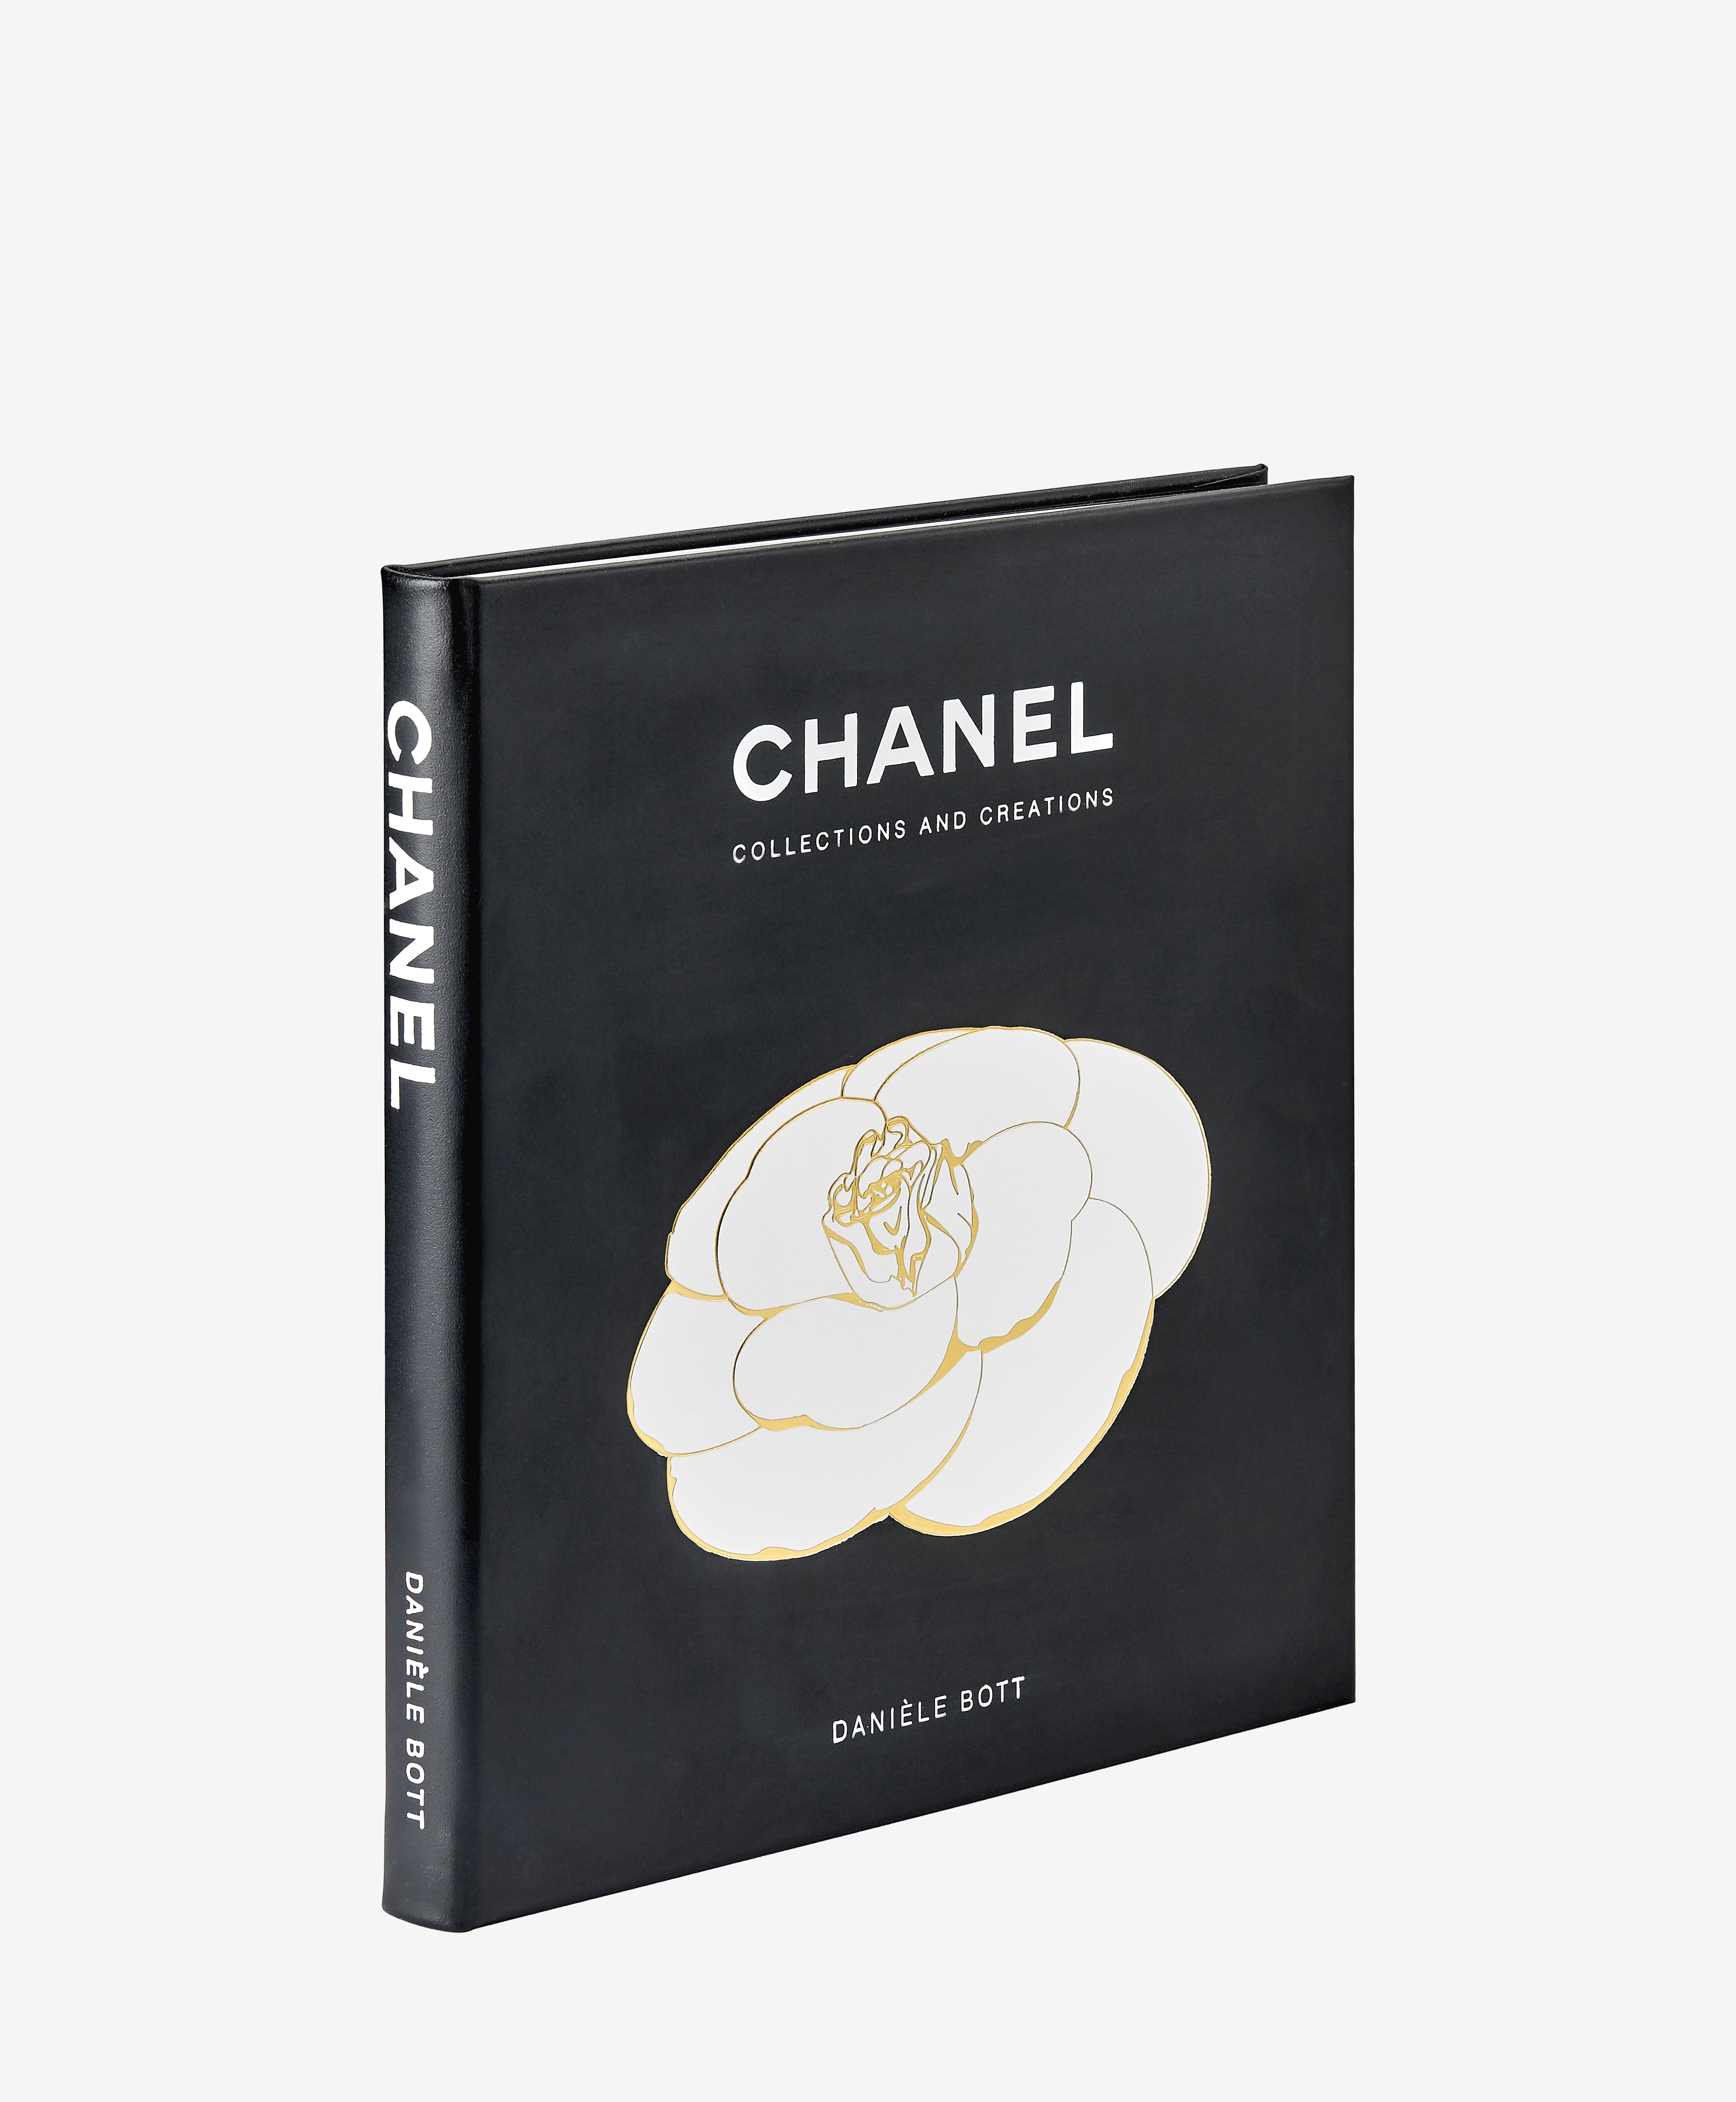 Chanel's new coco mademoiselle creation is here, and this is what